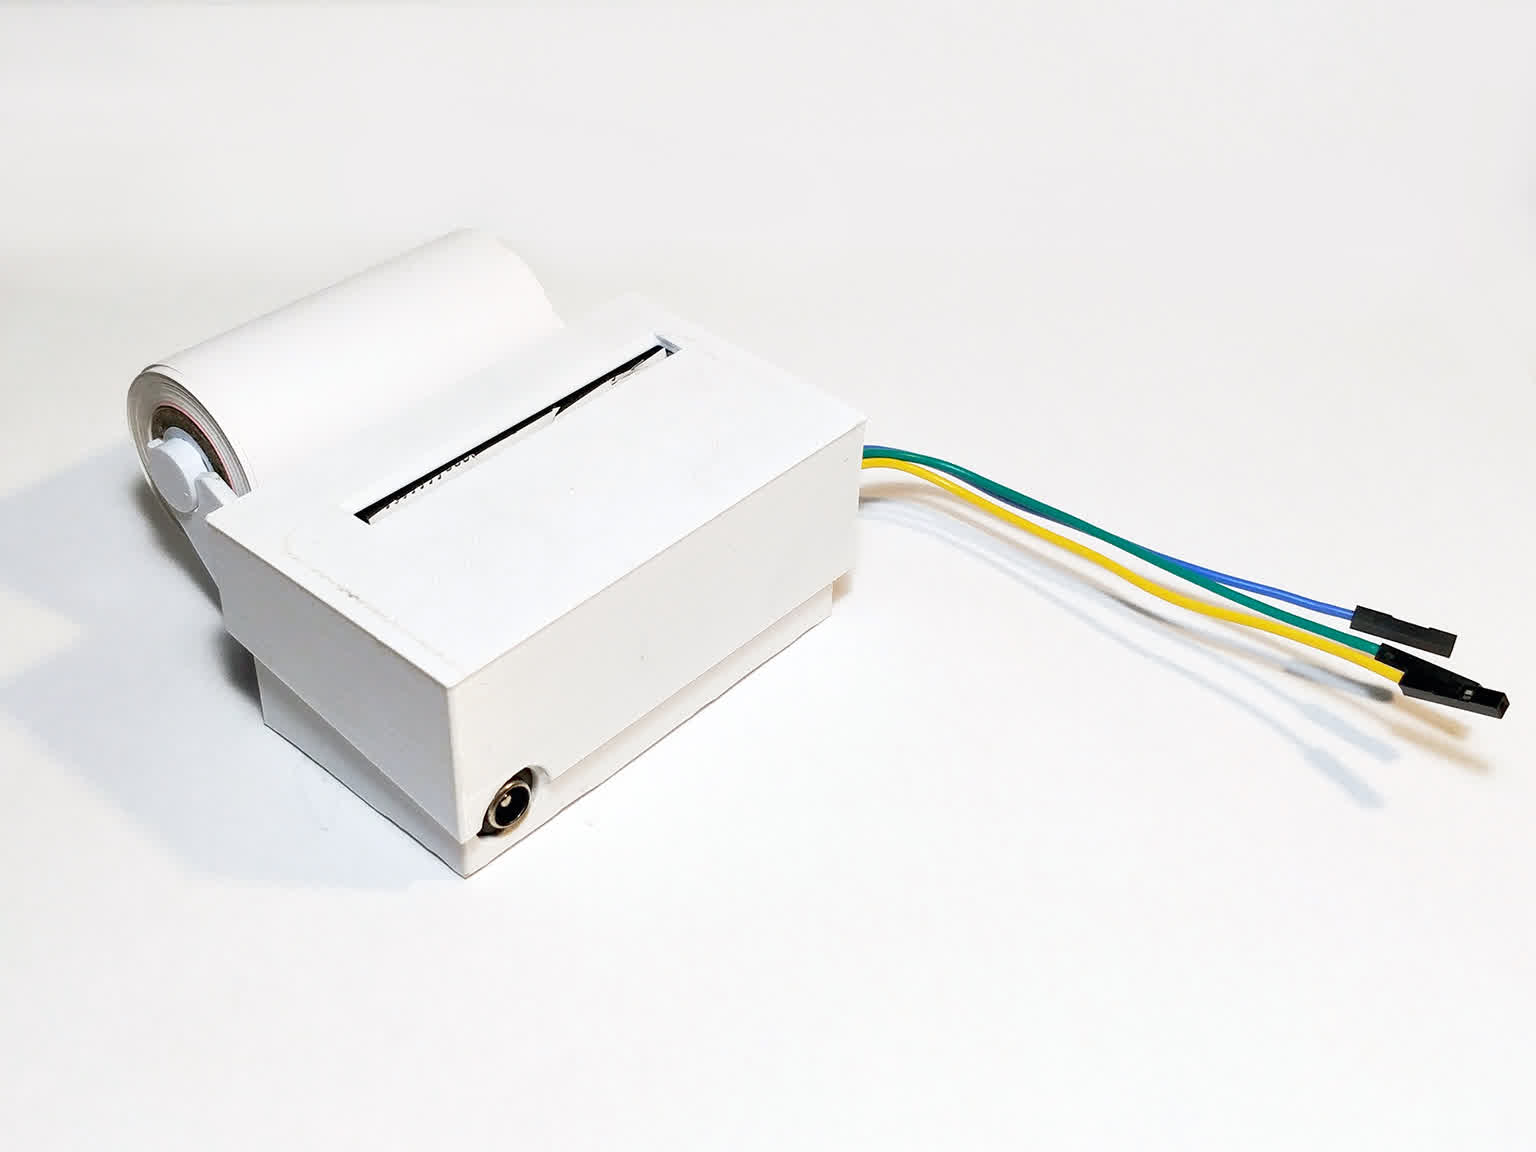 image of final thermal printer with lid on